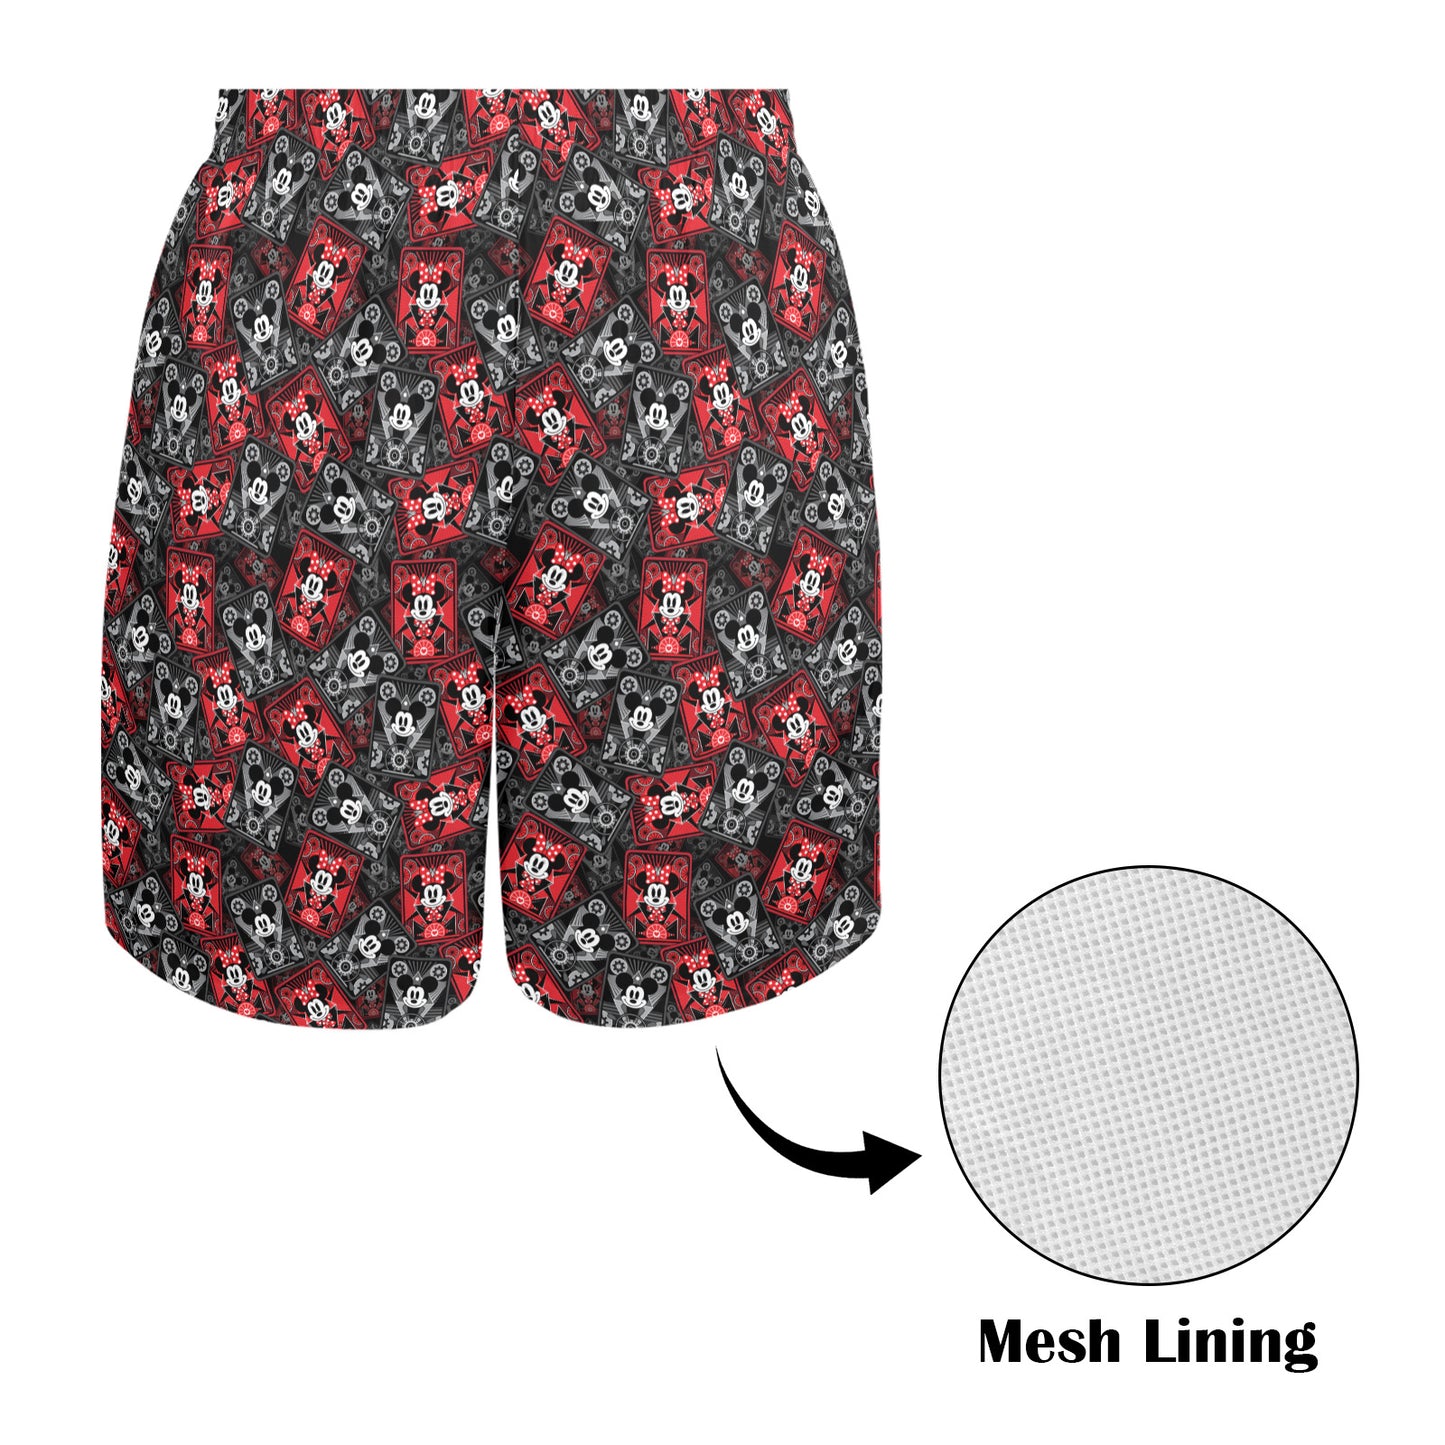 Steamboat Mickey And Minnie Cards Men's Swim Trunks Swimsuit